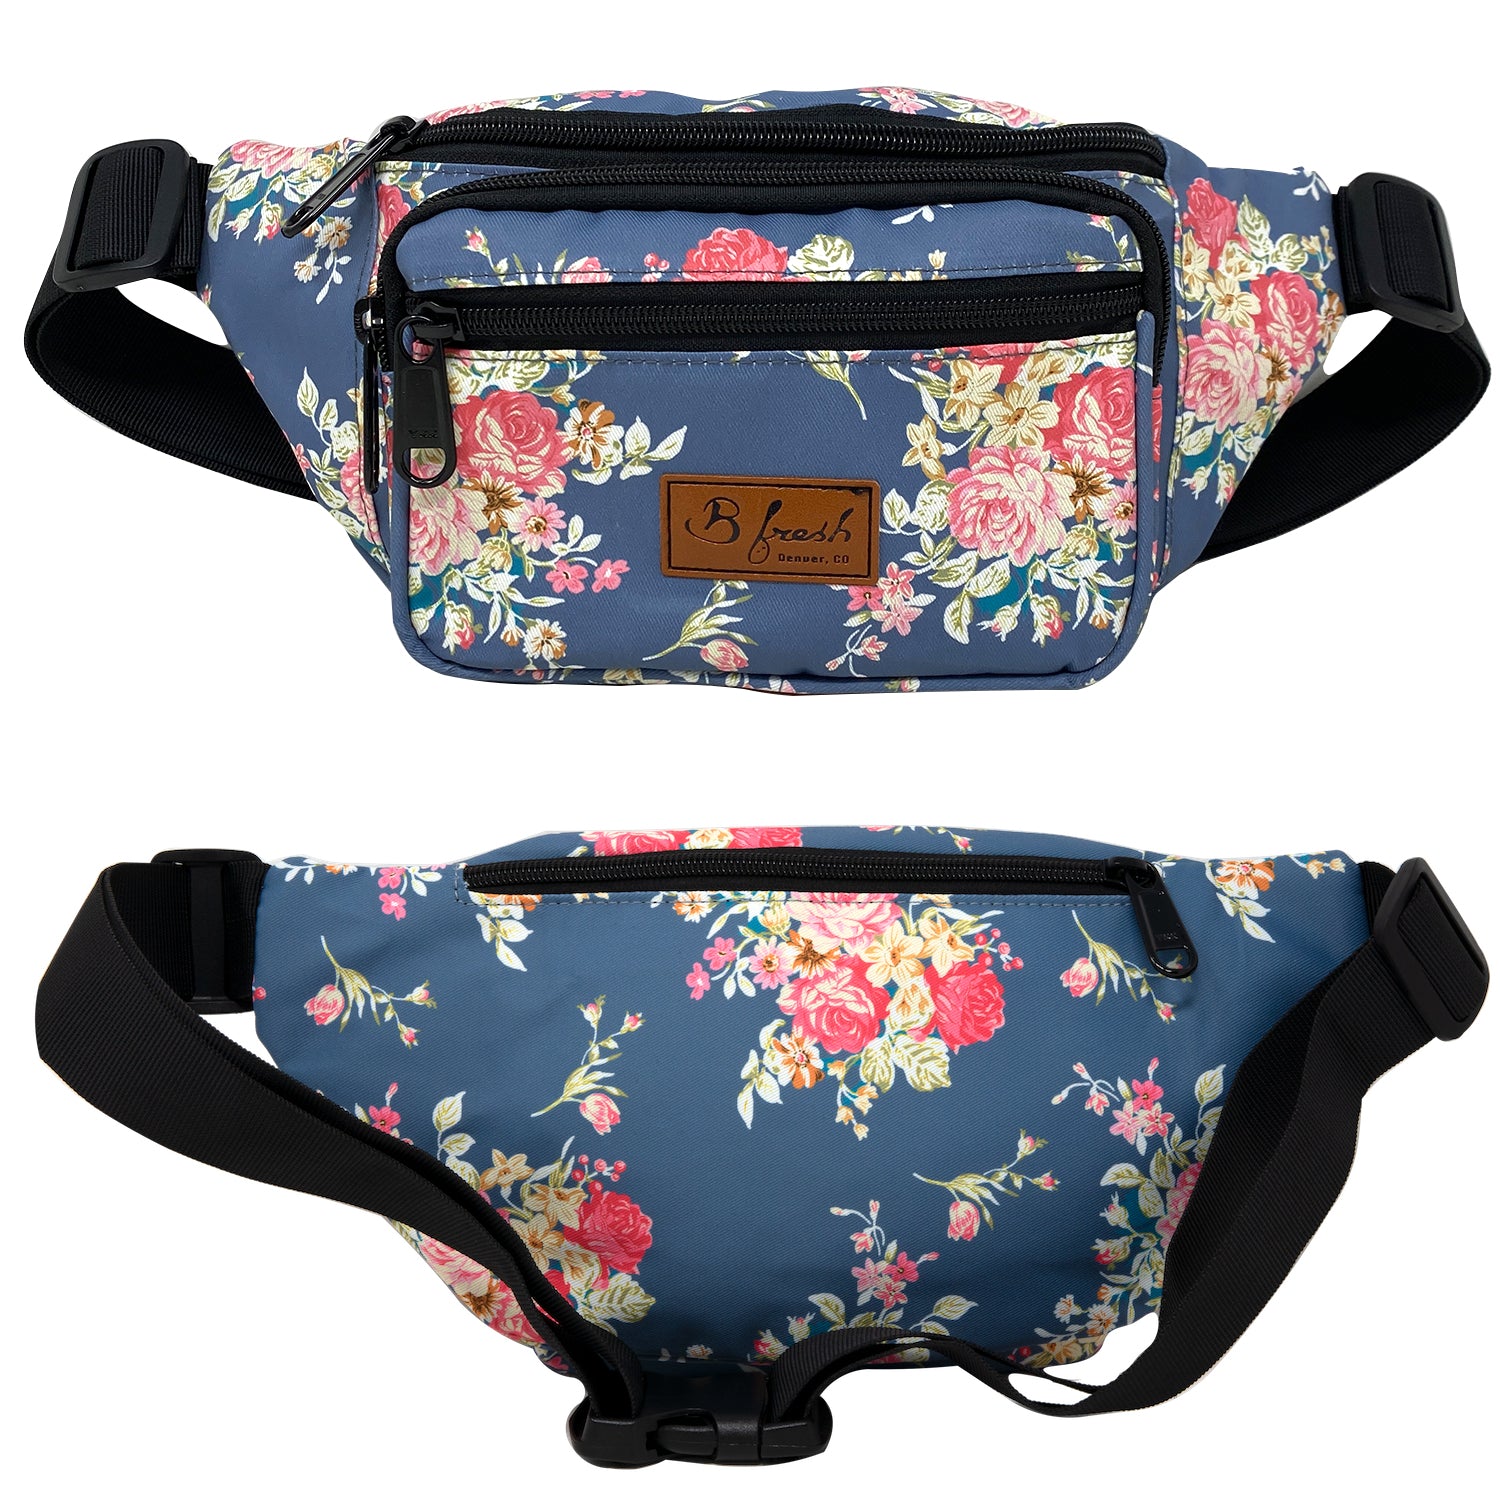 Grandmas Couch 80s Retro Fanny Pack.  Old school throwback vintage floral print blue pink white flower couch print fanny pack. B Fresh Gear